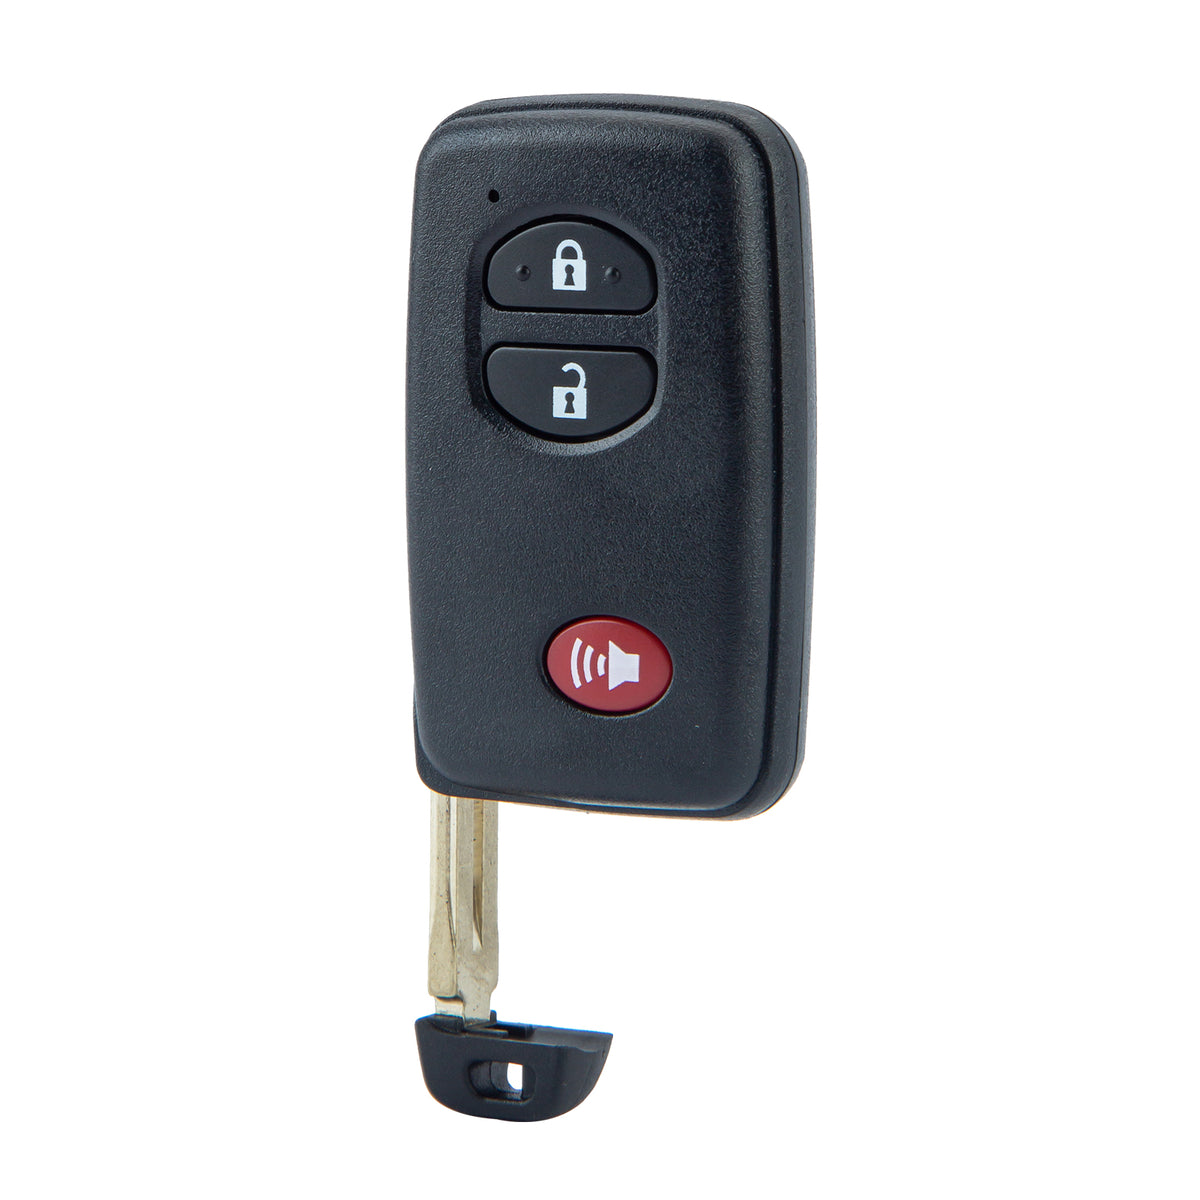 Smart car Key fob Replacement for Toyota 4Runner Prius C V Venza with FCC ID: HYQ14ACX 271451-5290